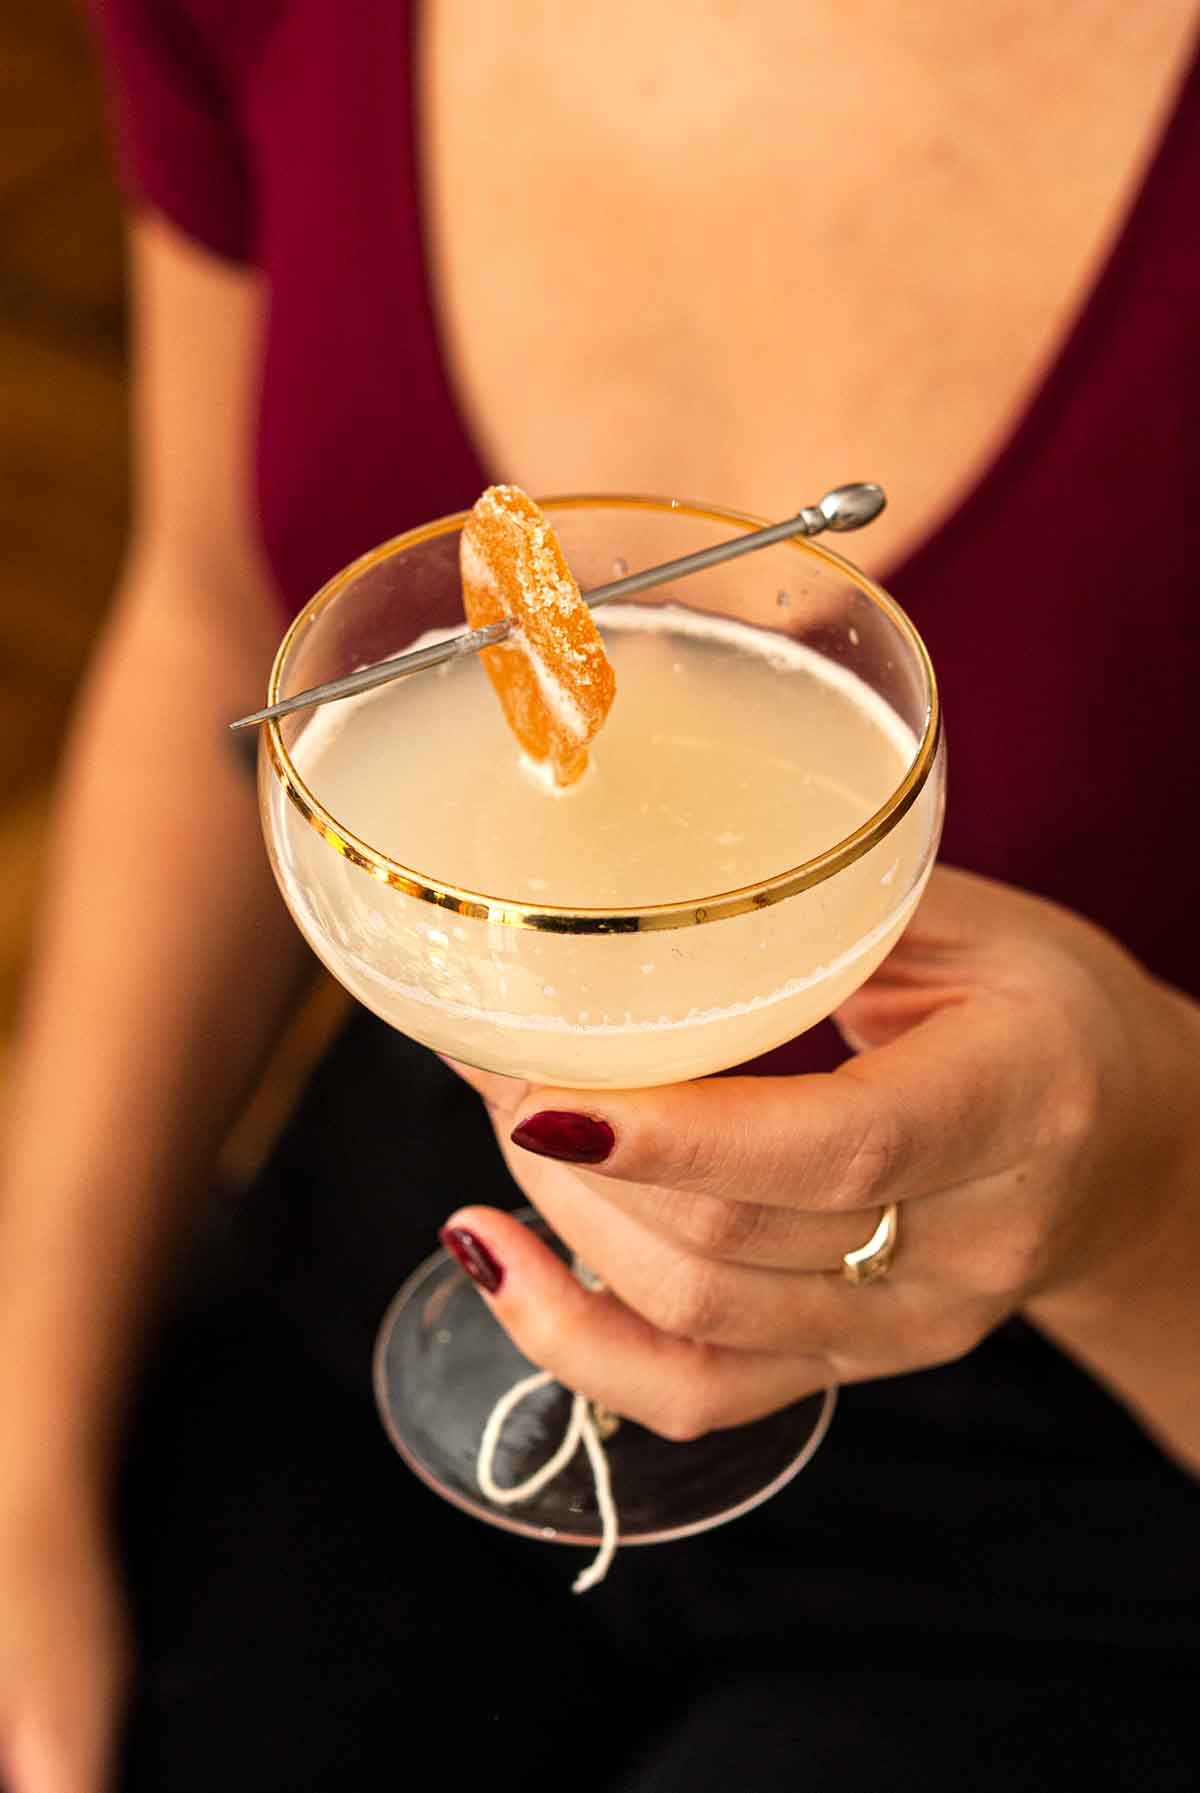 A woman's hand holding a cocktail garnished with candied ginger.